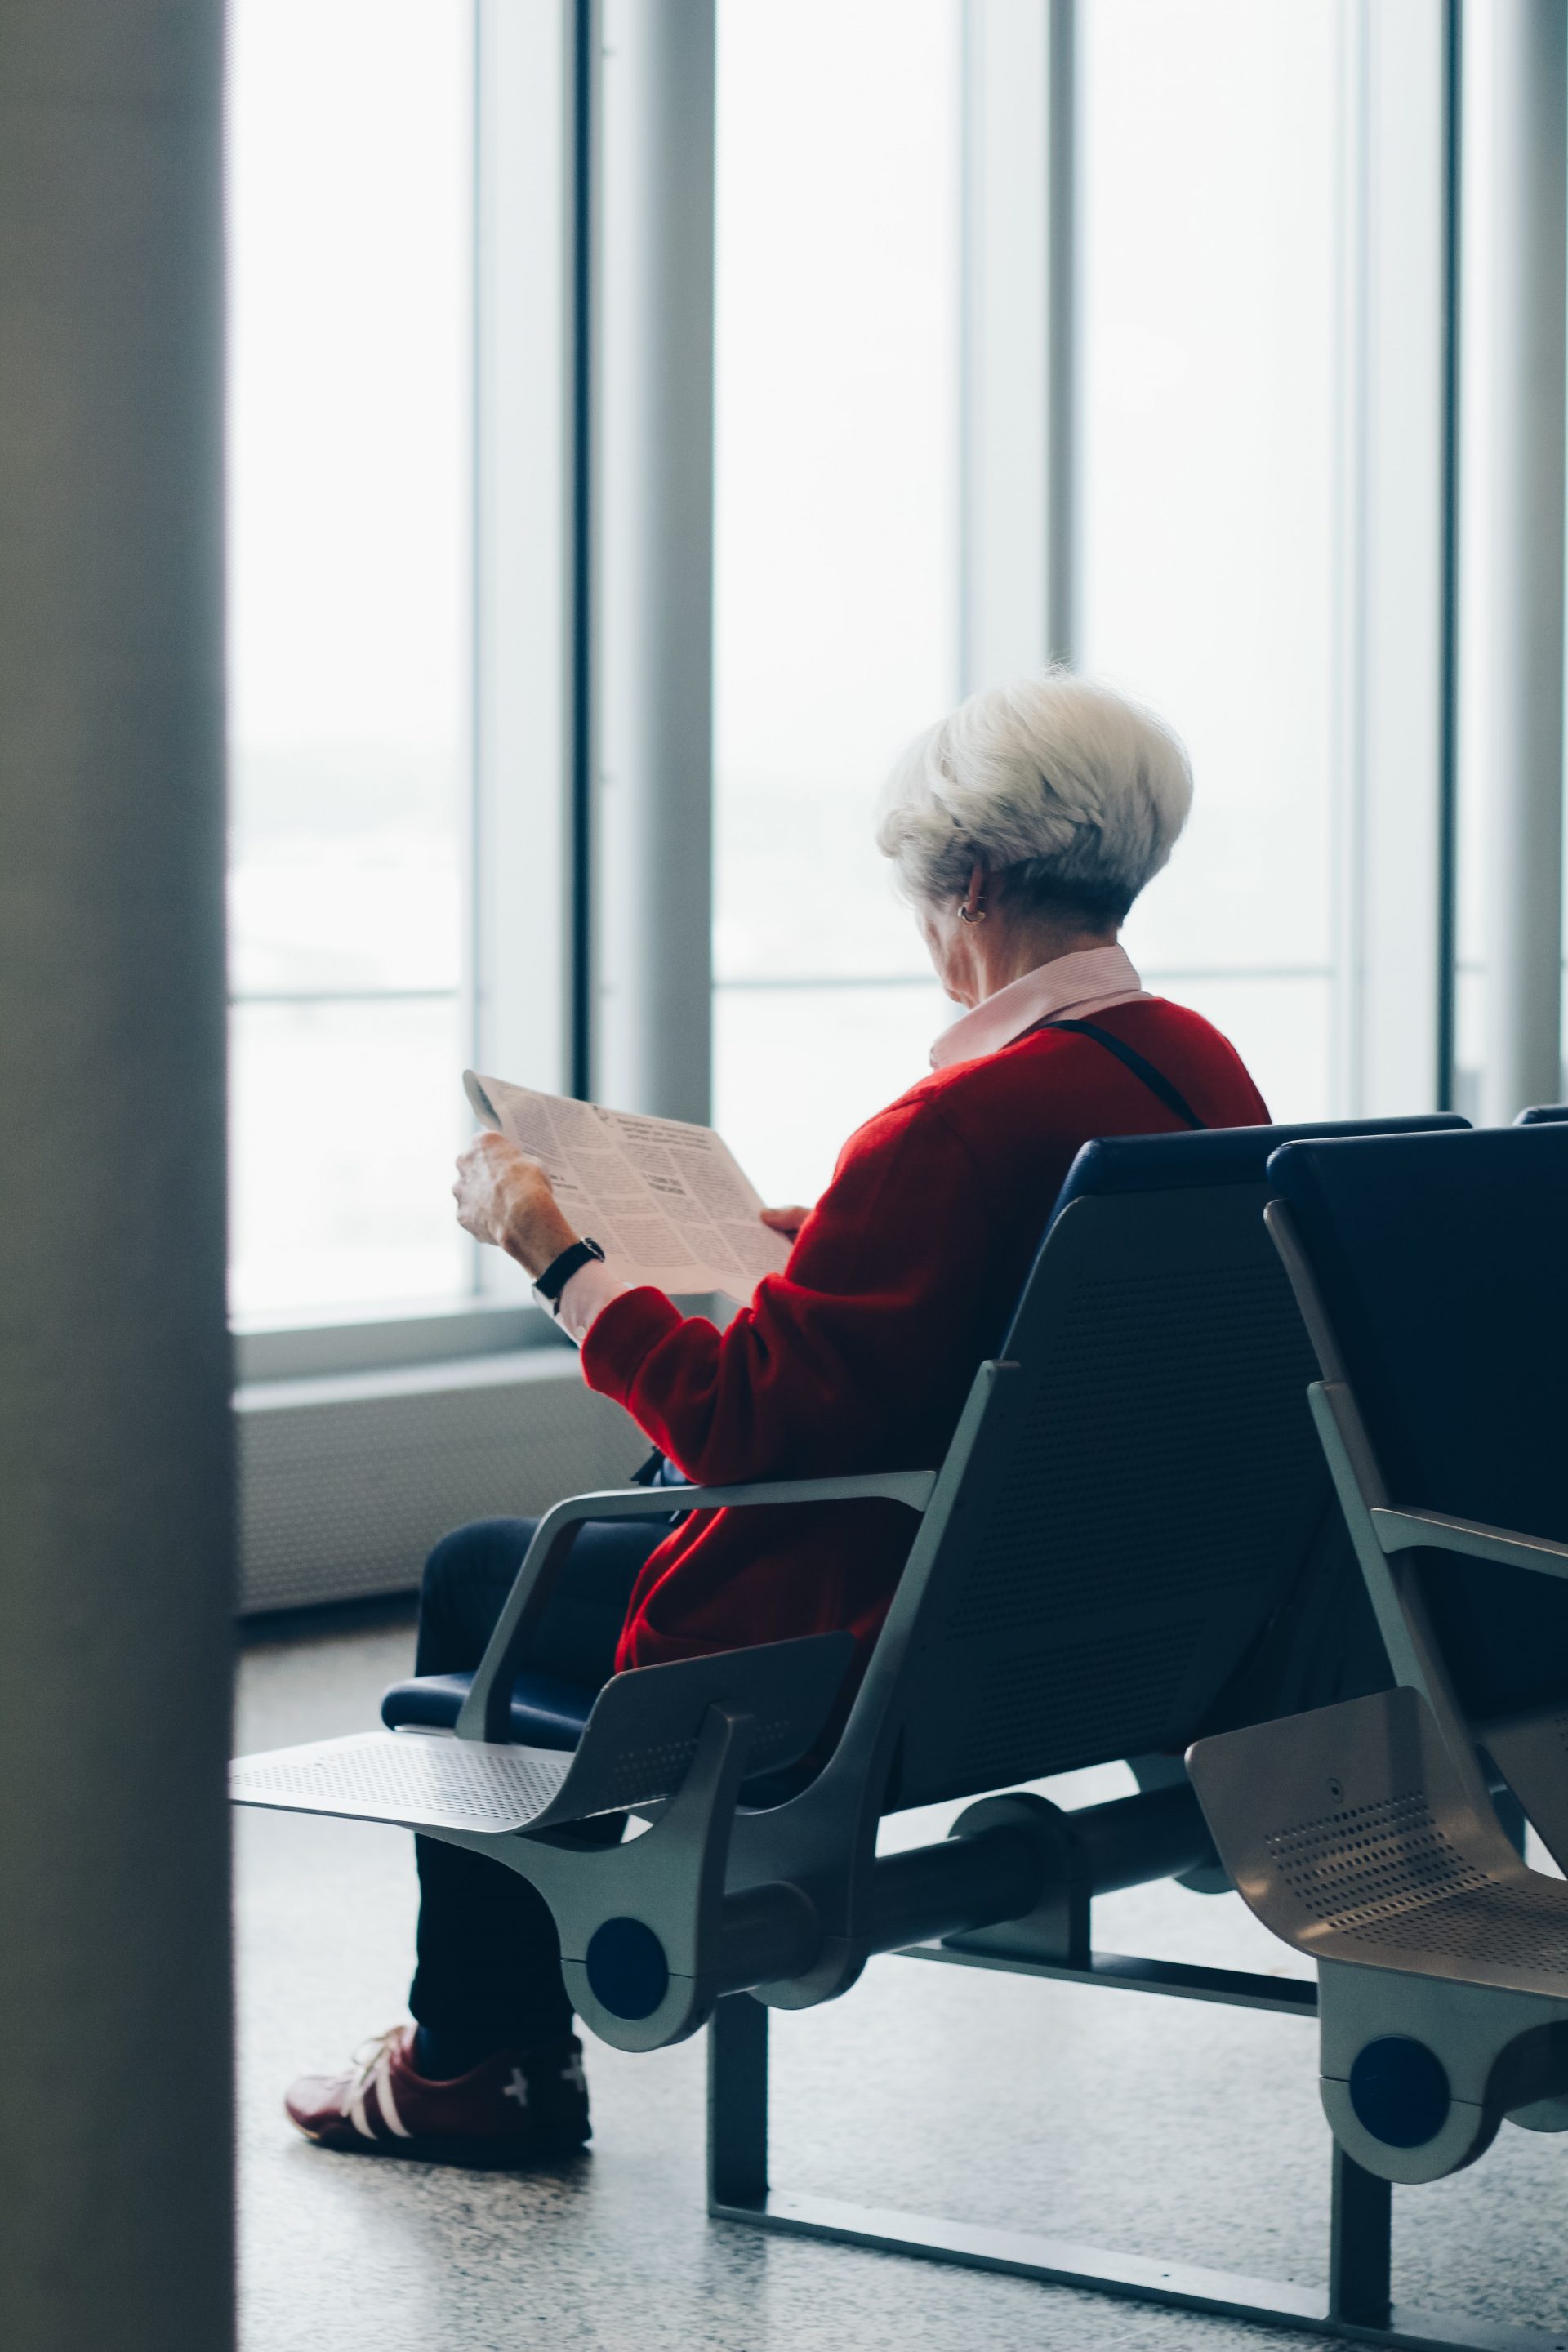 Grey haired woman sitting, waiting, and reading newspaper at airport waiting area.